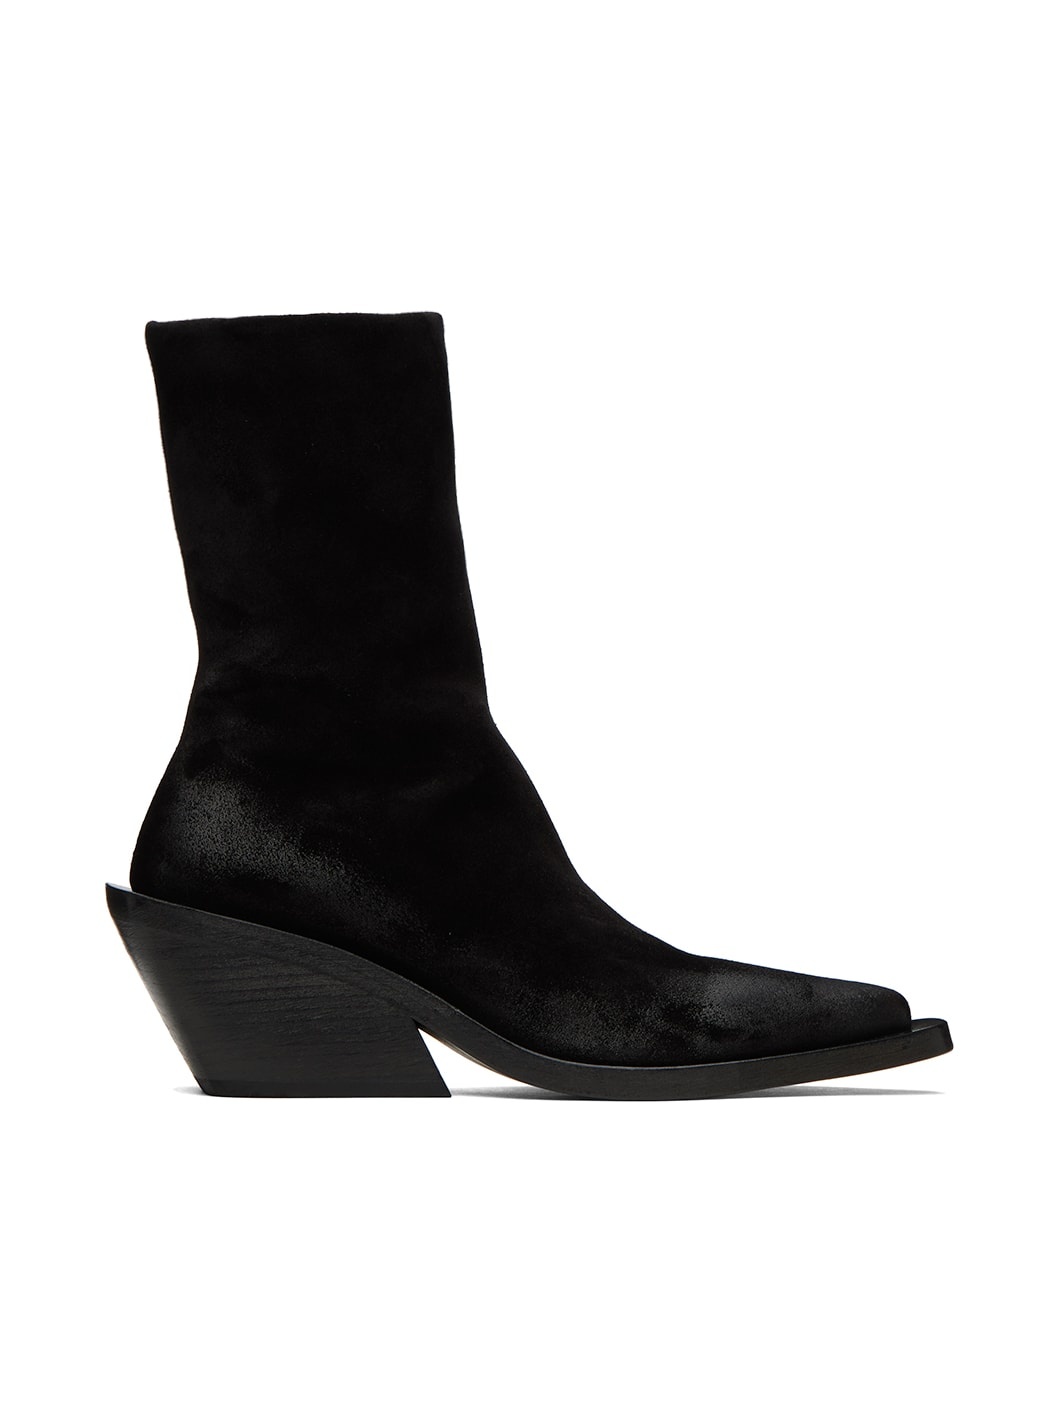 Black Gessetto Boots. - 1